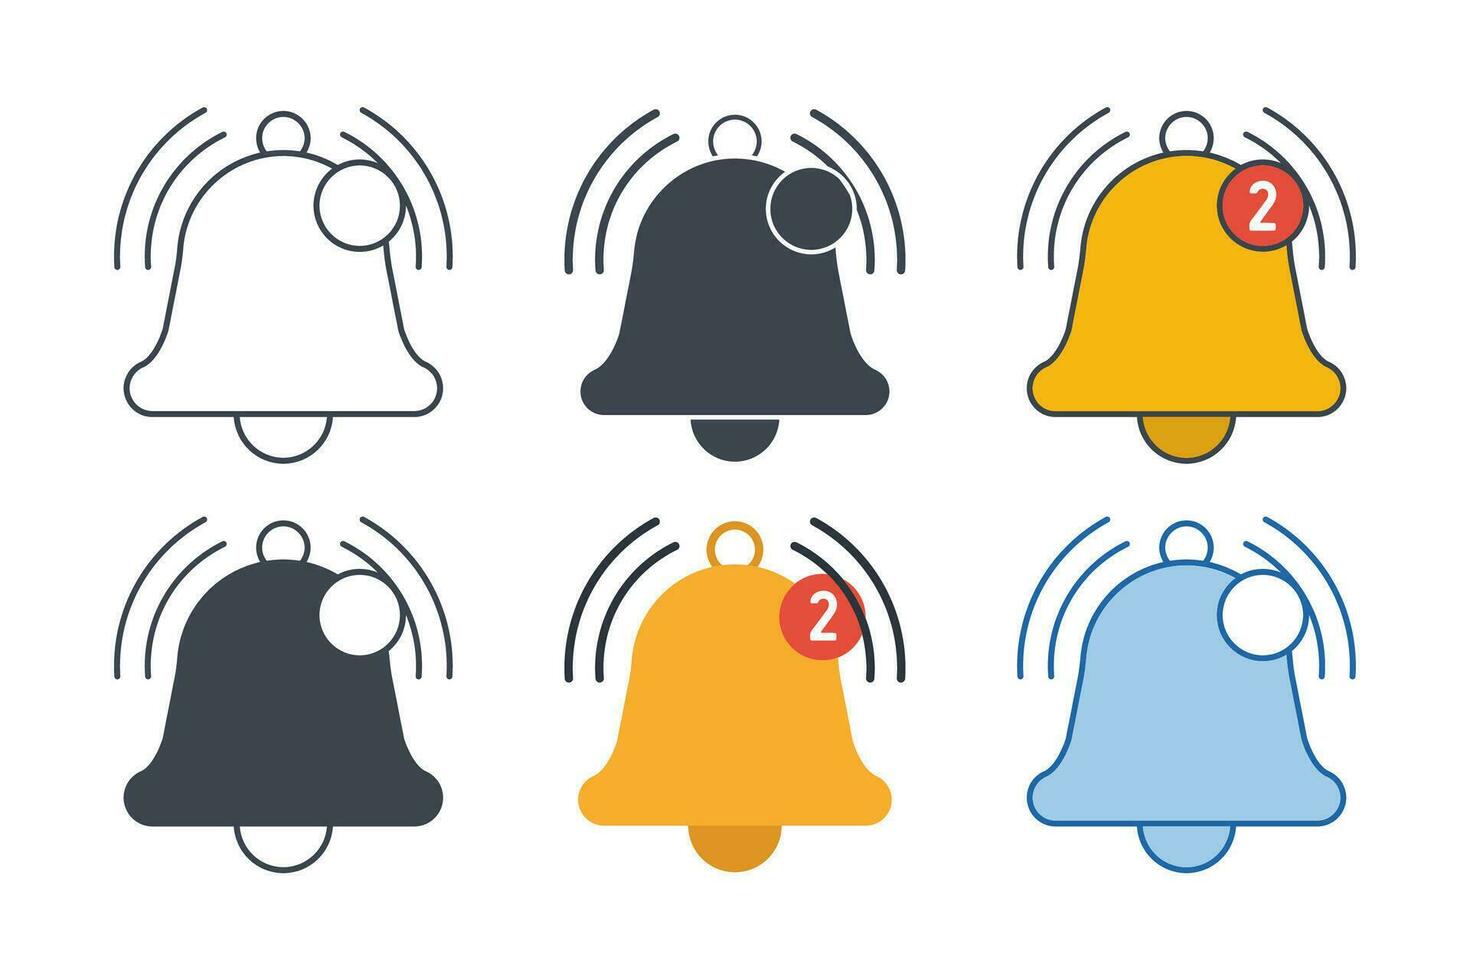 Notification bell icon collection with different styles. Ringing bell and notification for clock and smartphone, alarm alert icon symbol vector illustration isolated on white background